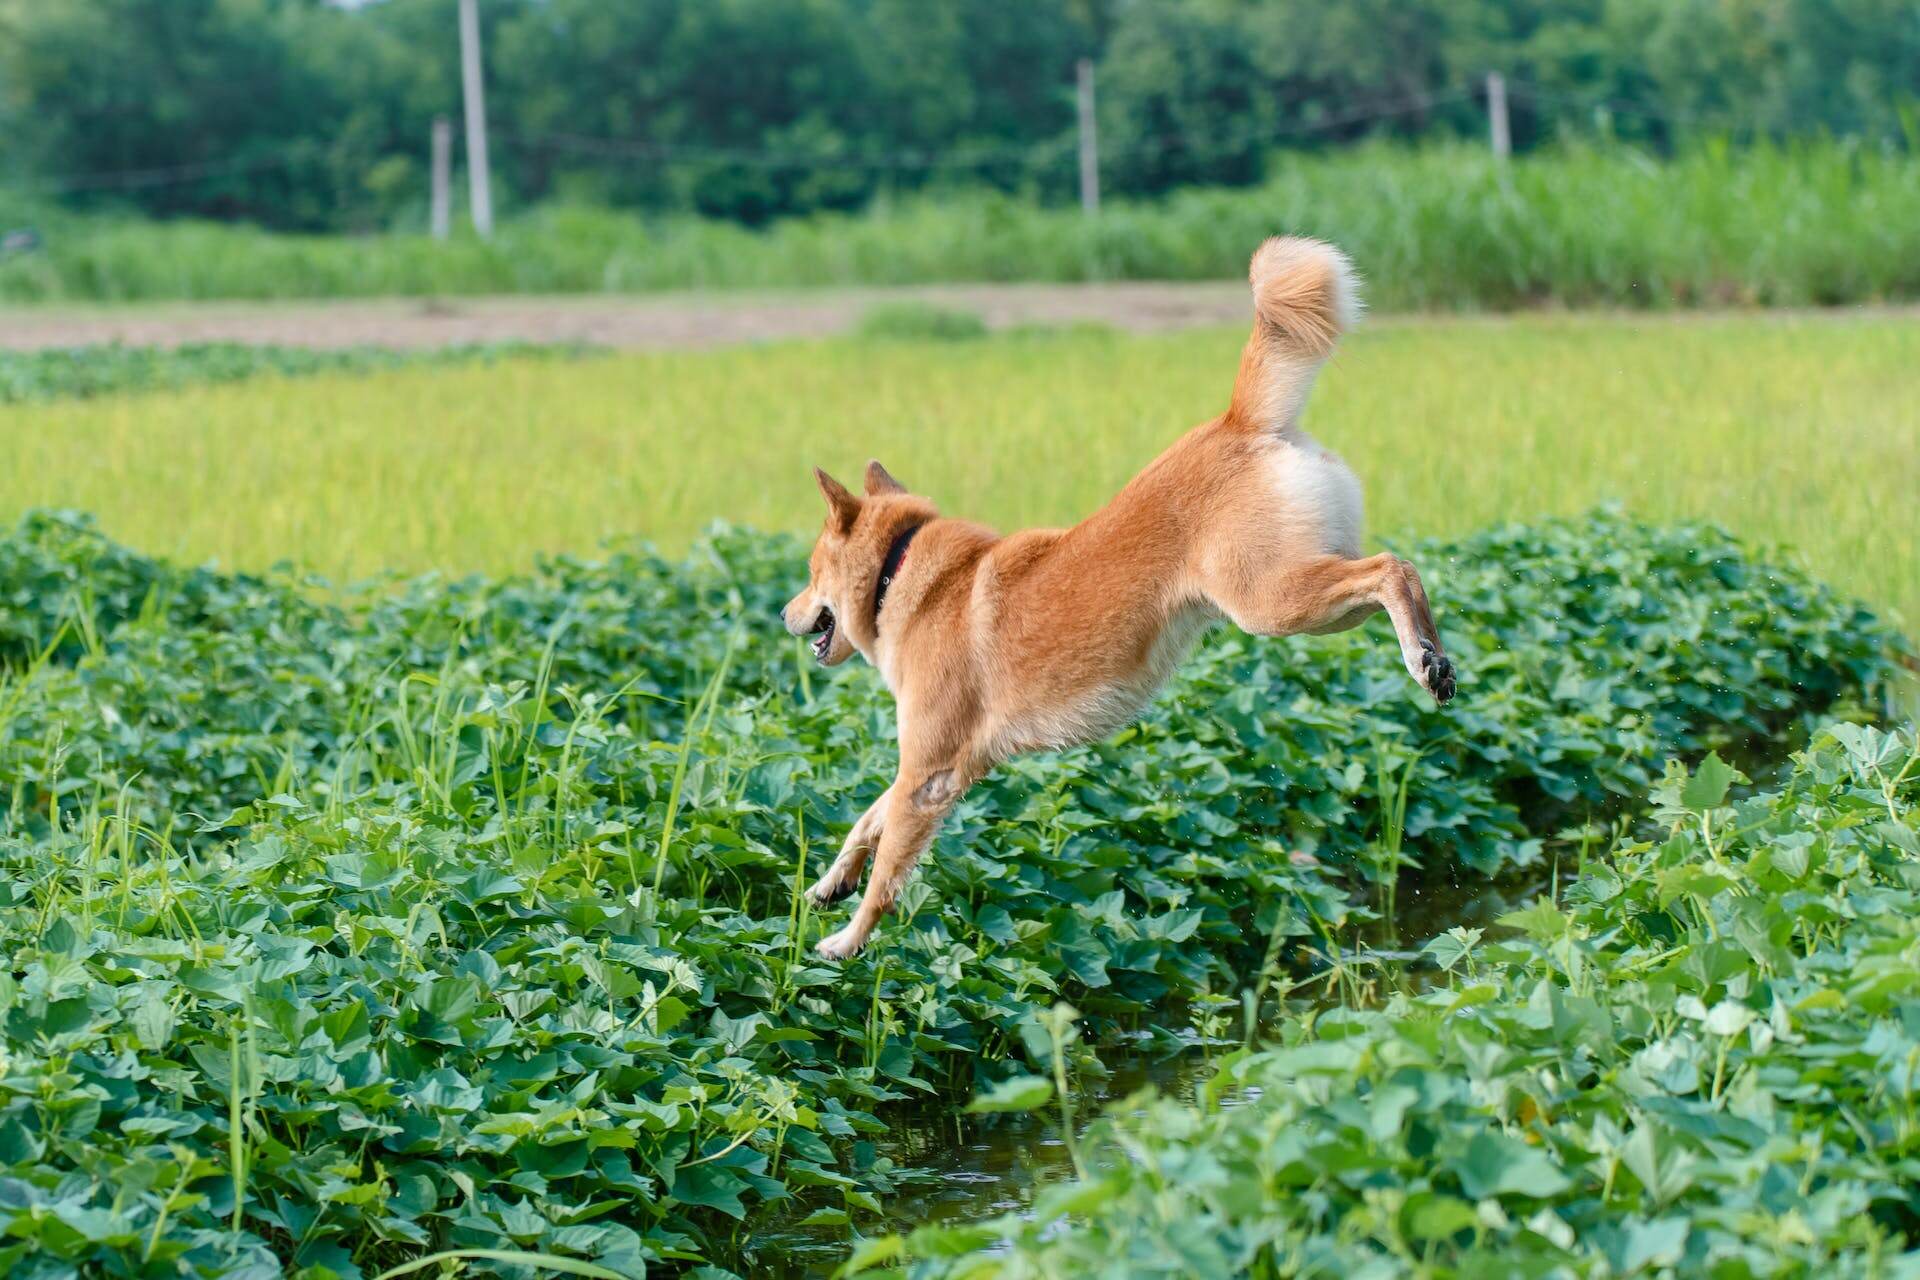 A dog running into a row of plants outdoors